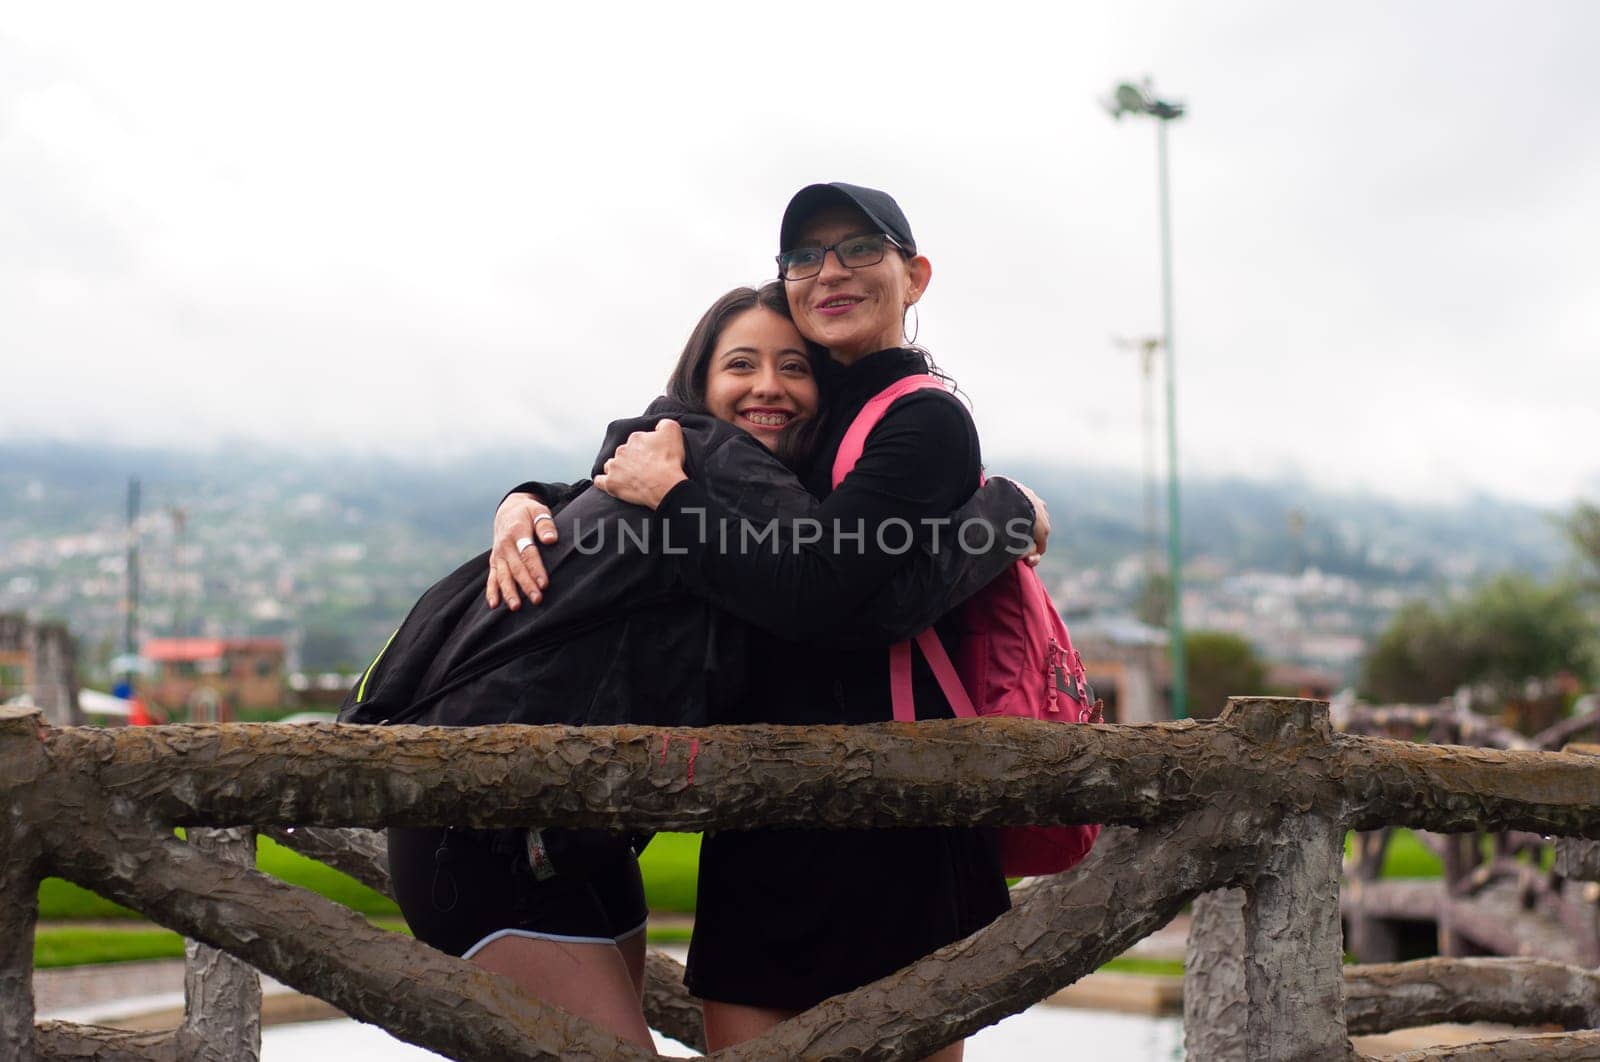 Mother and daughter in black sportswear hugging on a wooden bridge in a natural environment, both are very happy. by Raulmartin